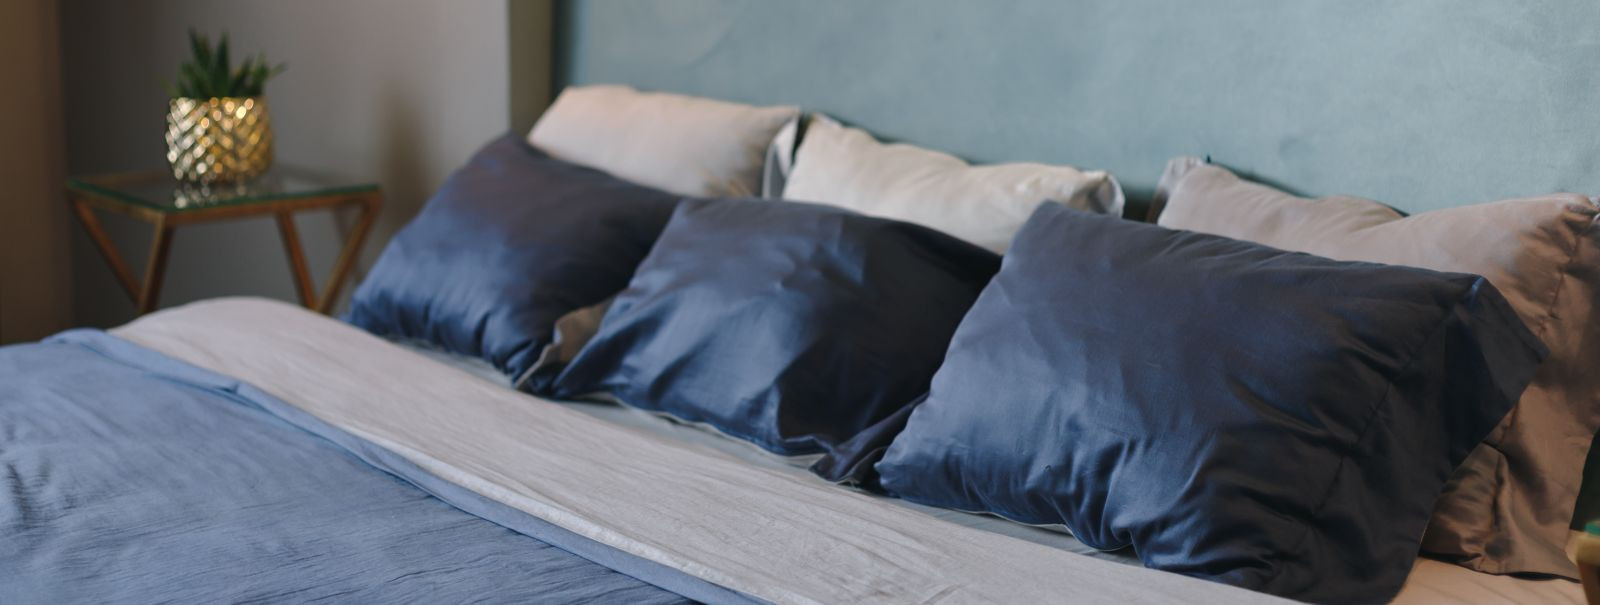 Imagine a world where your bedroom becomes a sanctuary, free from sneezes, itchy eyes, and interrupted sleep. Hypoallergenic bedding is not just a luxury; it's 